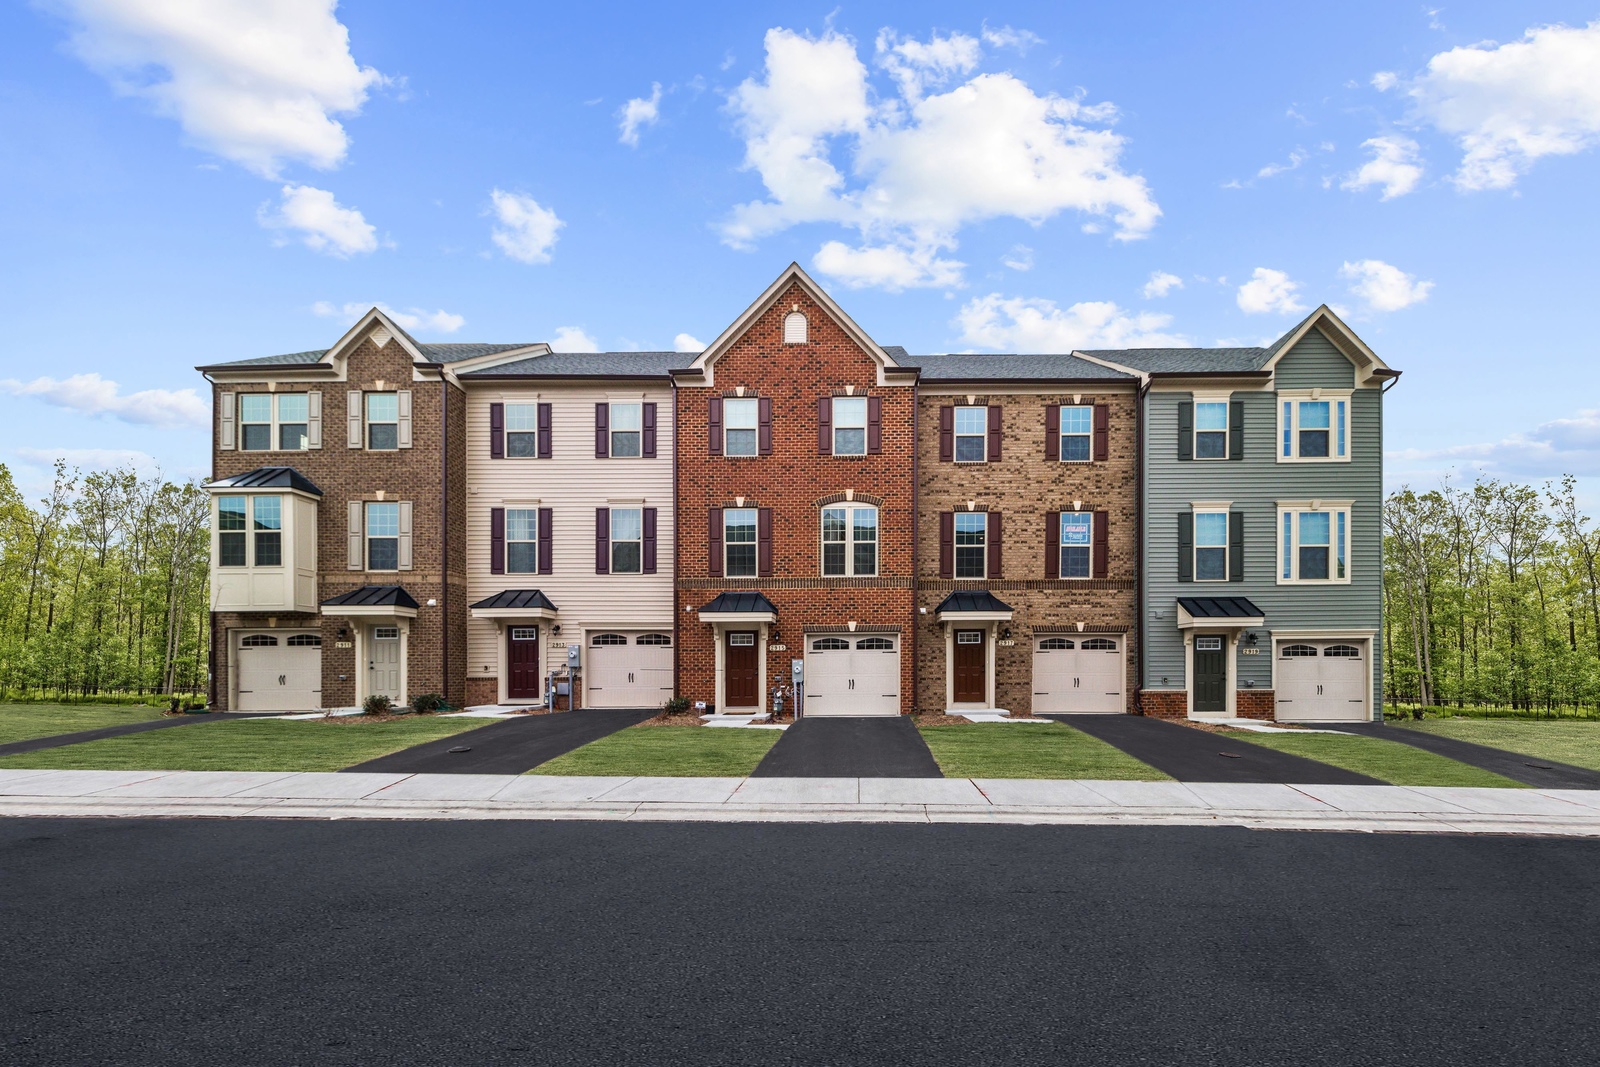 8 Townhomes for rent ideas - townhomes for rent, townhouse, townhouse  exterior